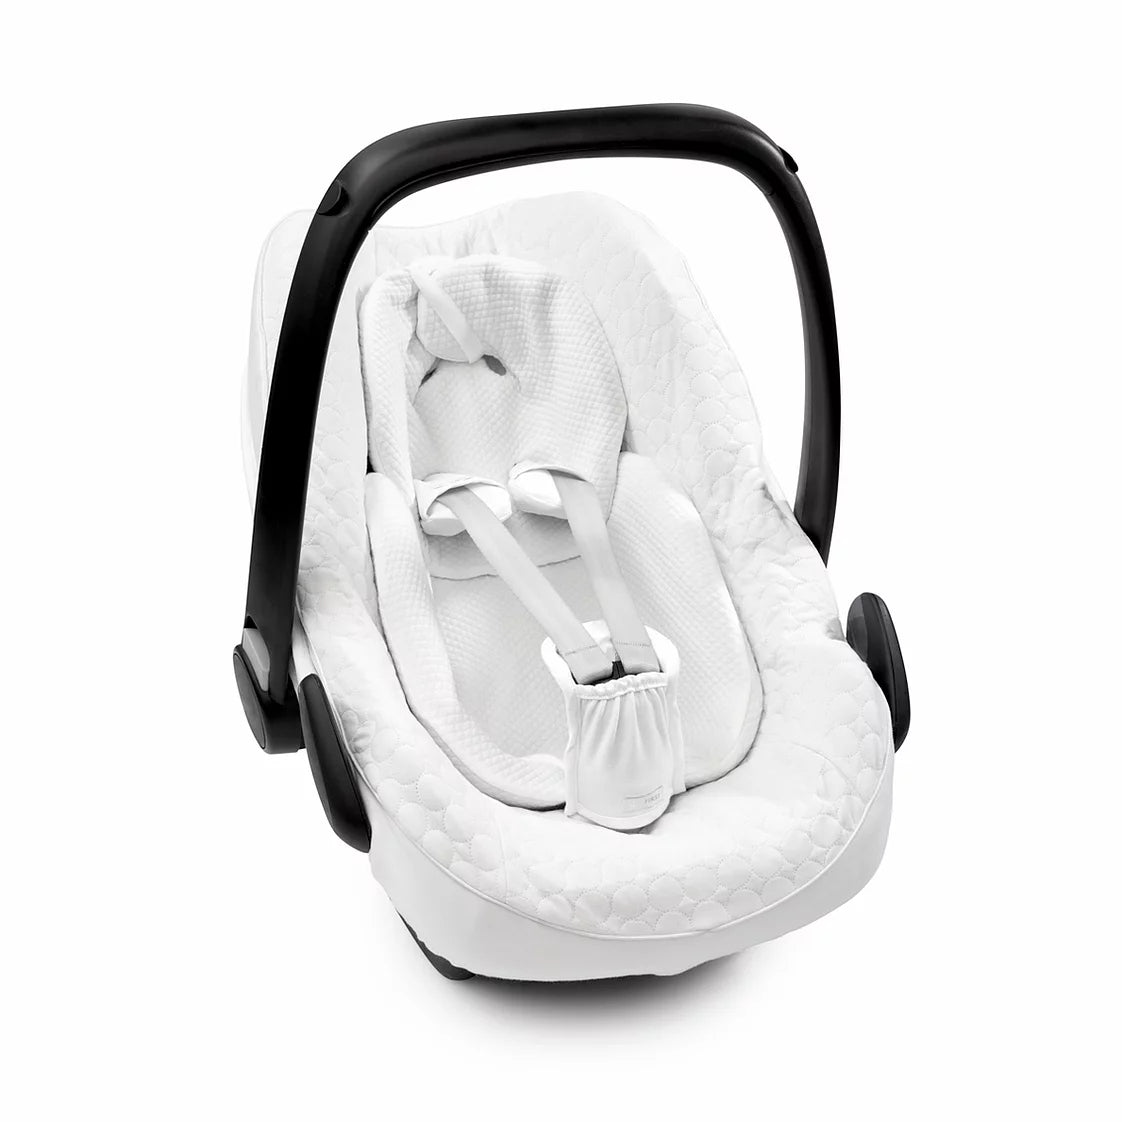 First Crystel White Cover for Maxicosi Car Seat